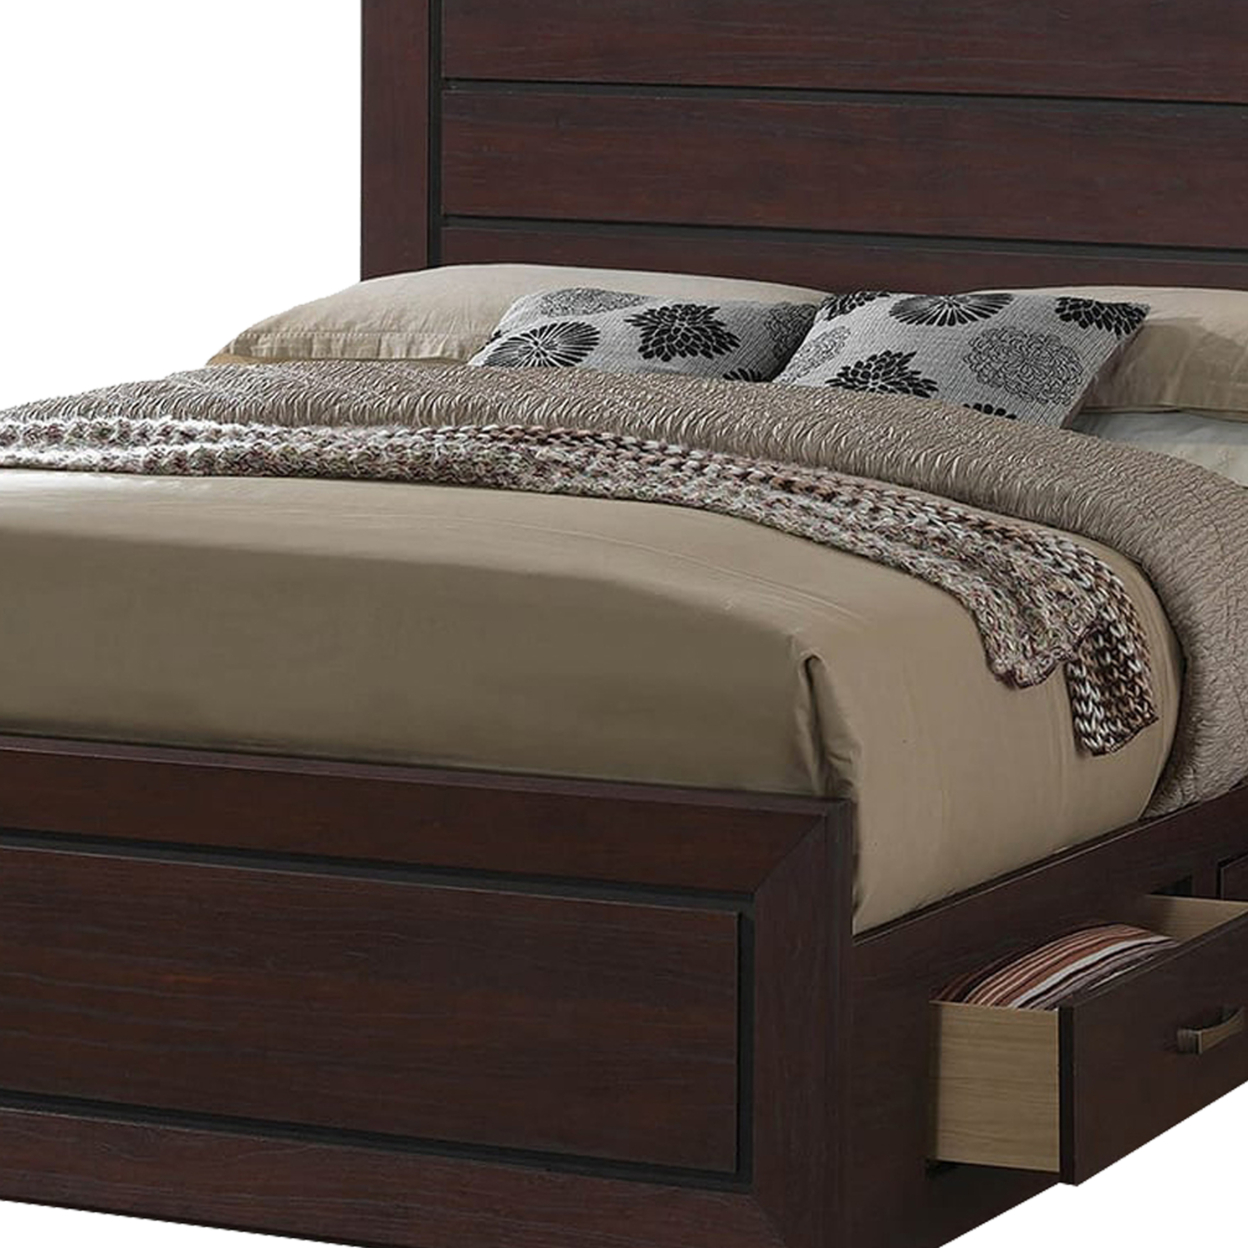 Wooden Queen Size Bed With 4 Spacious Side Rail Drawers, Dark Brown- Saltoro Sherpi